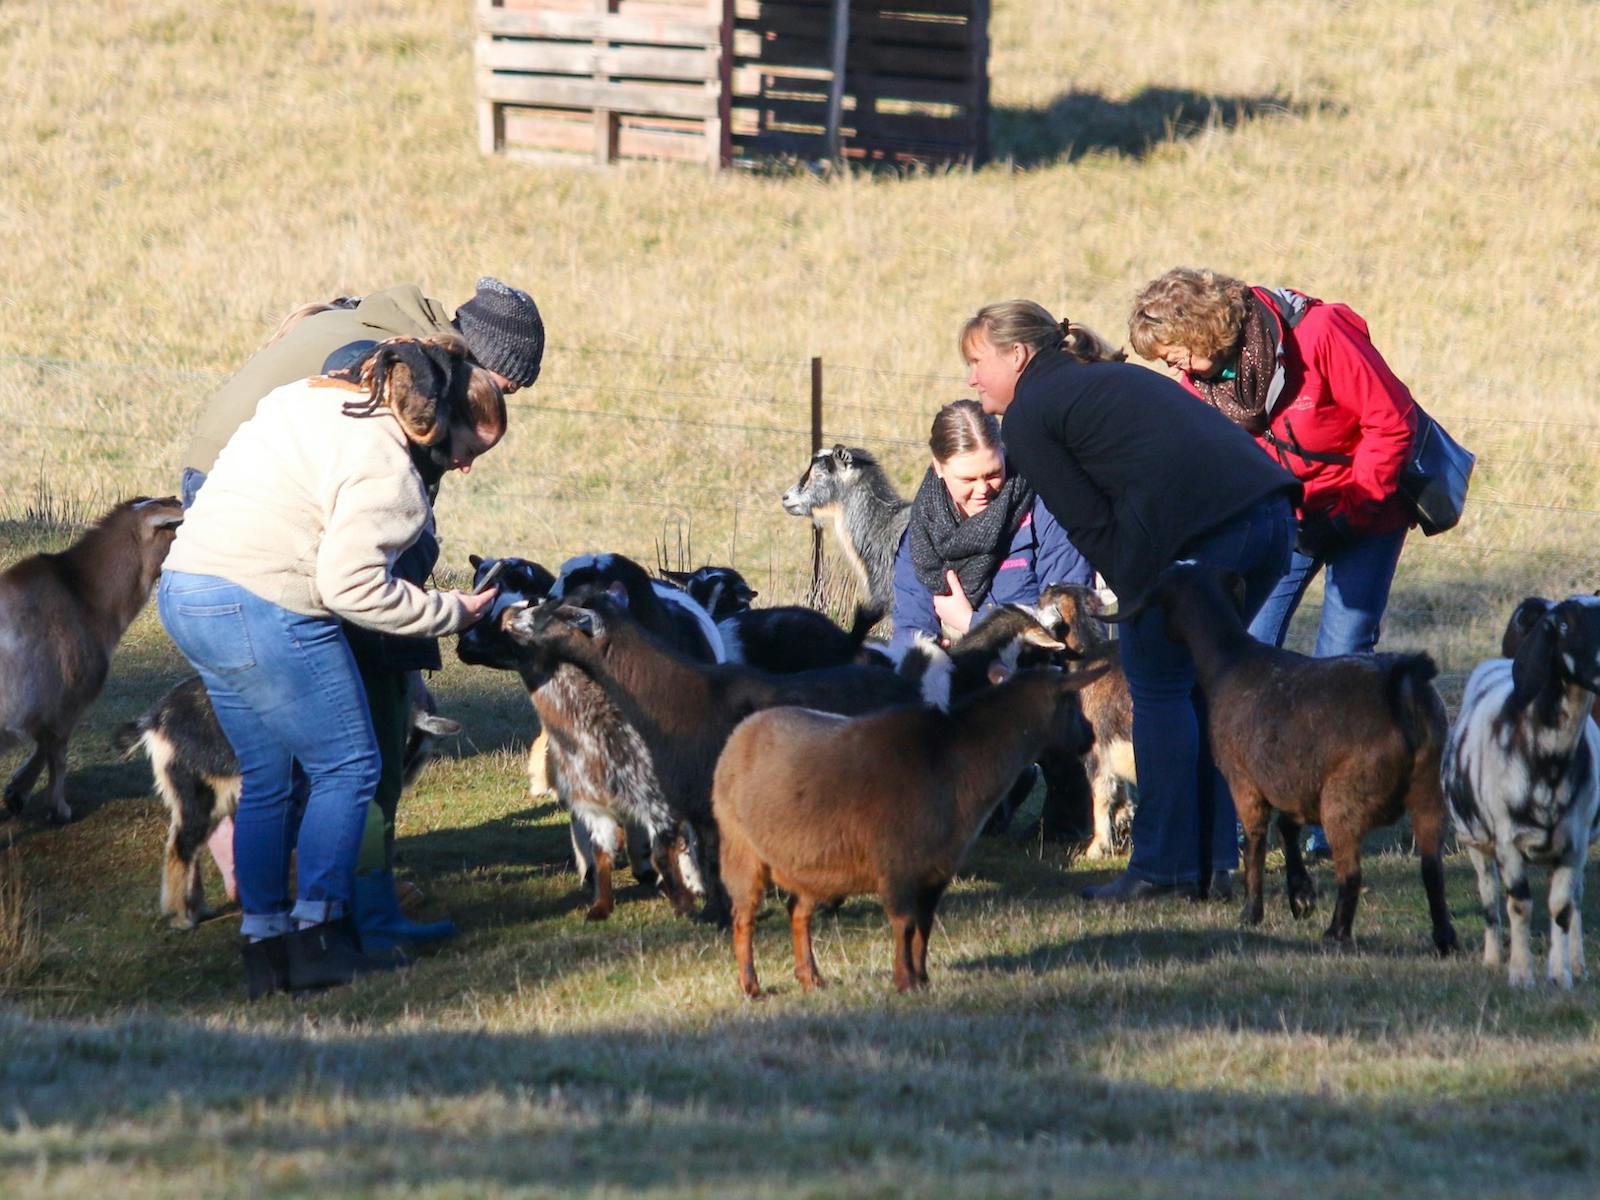 Guests feeding the goats